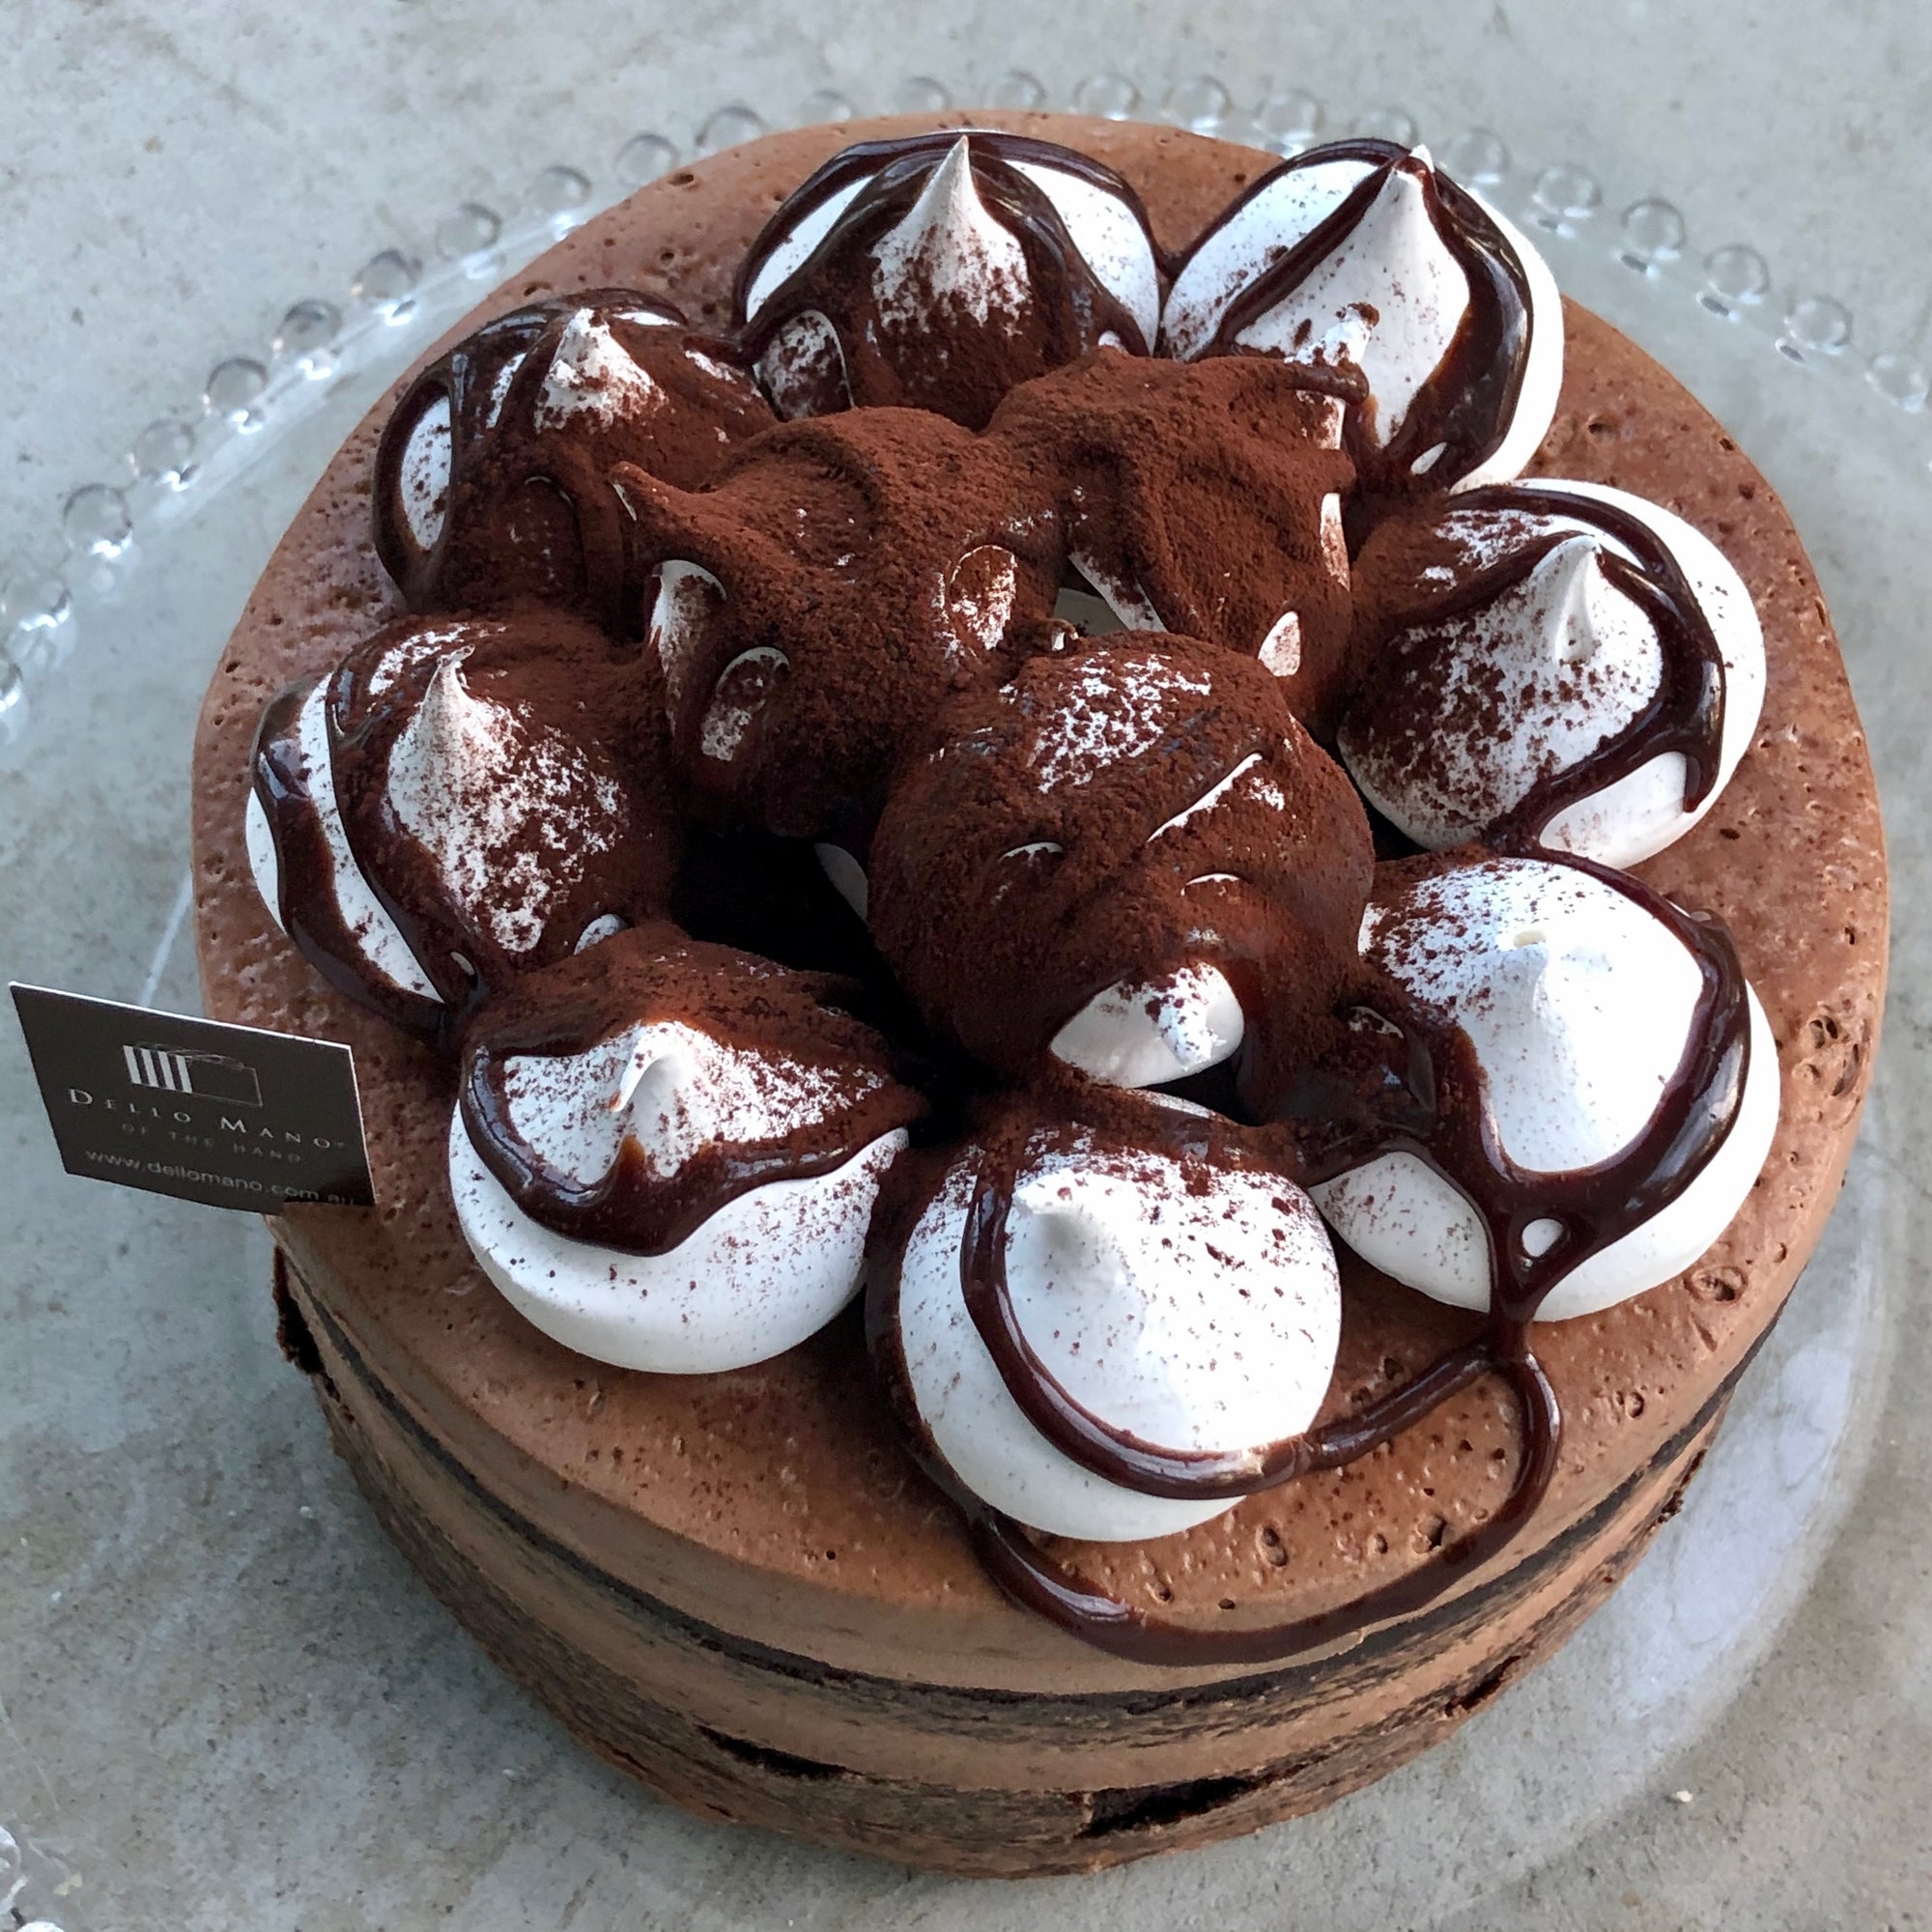 A chocolate cake with white meringues drizzled with chocolate sauce and dus